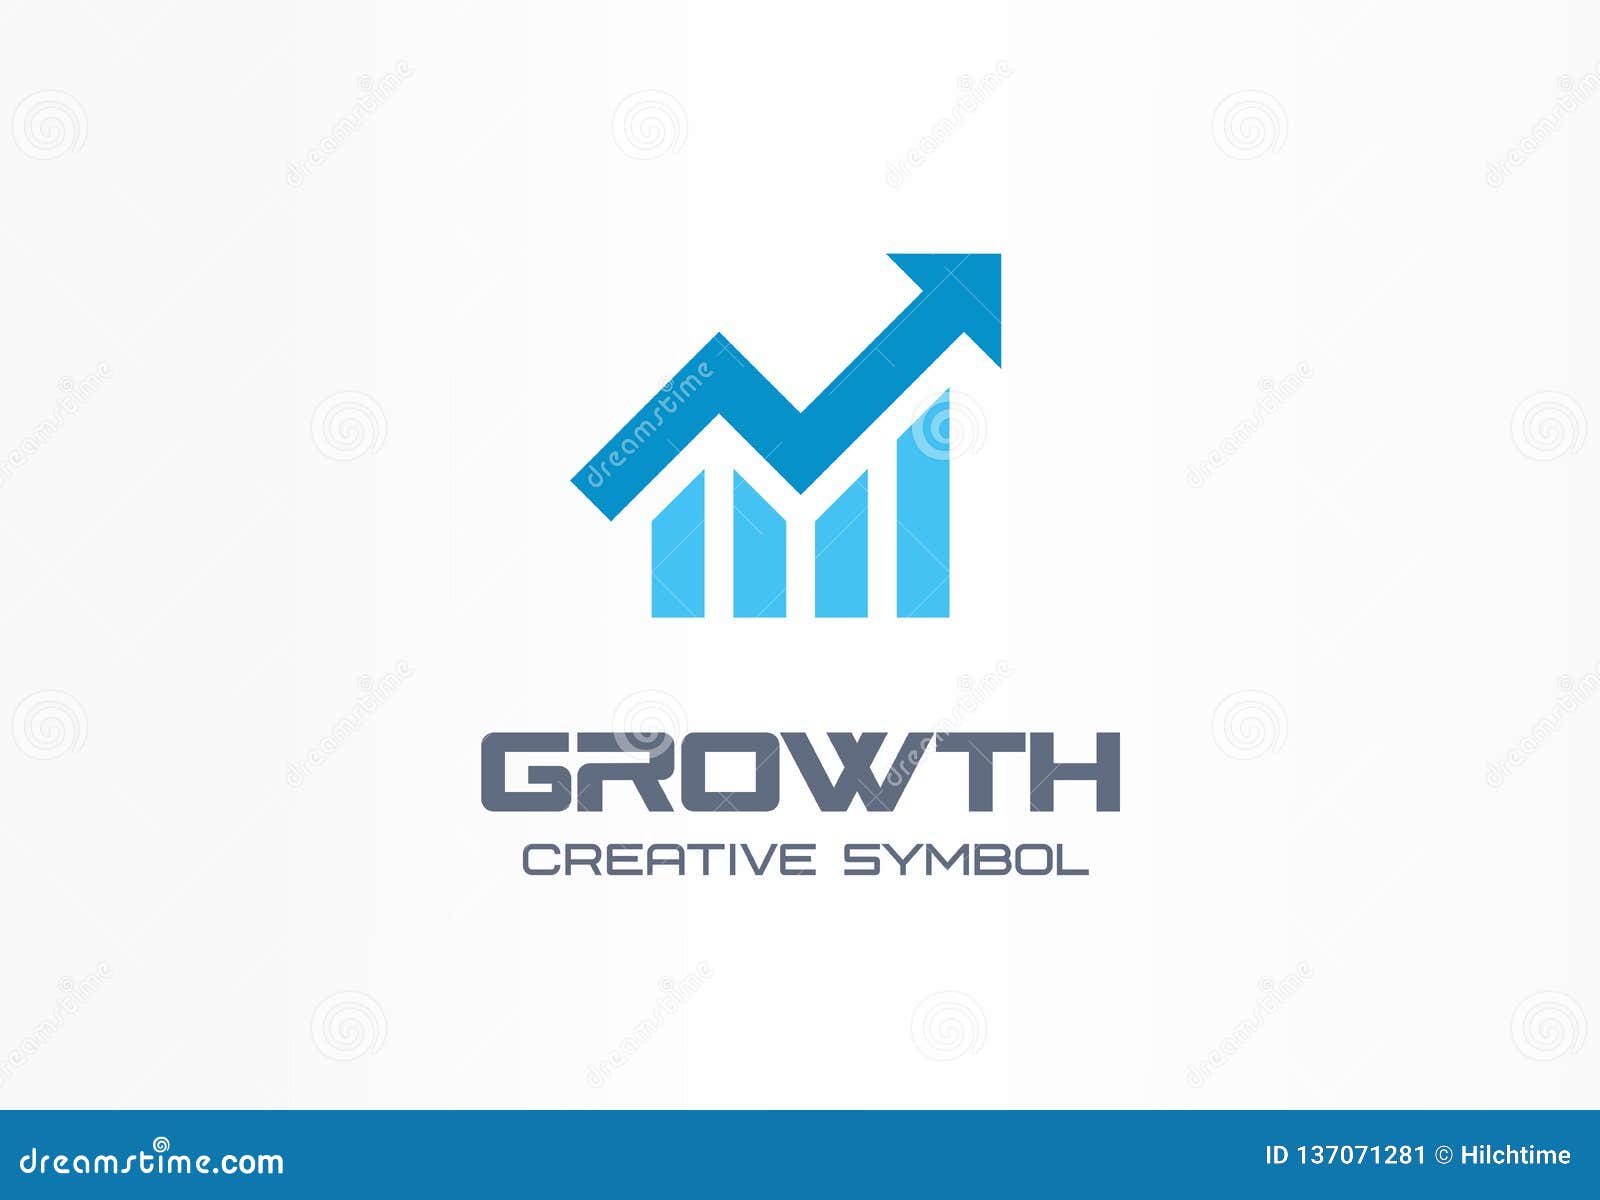 growth creative  concept. increase, bank profit, grow up arrow abstract business logo. stock finance market